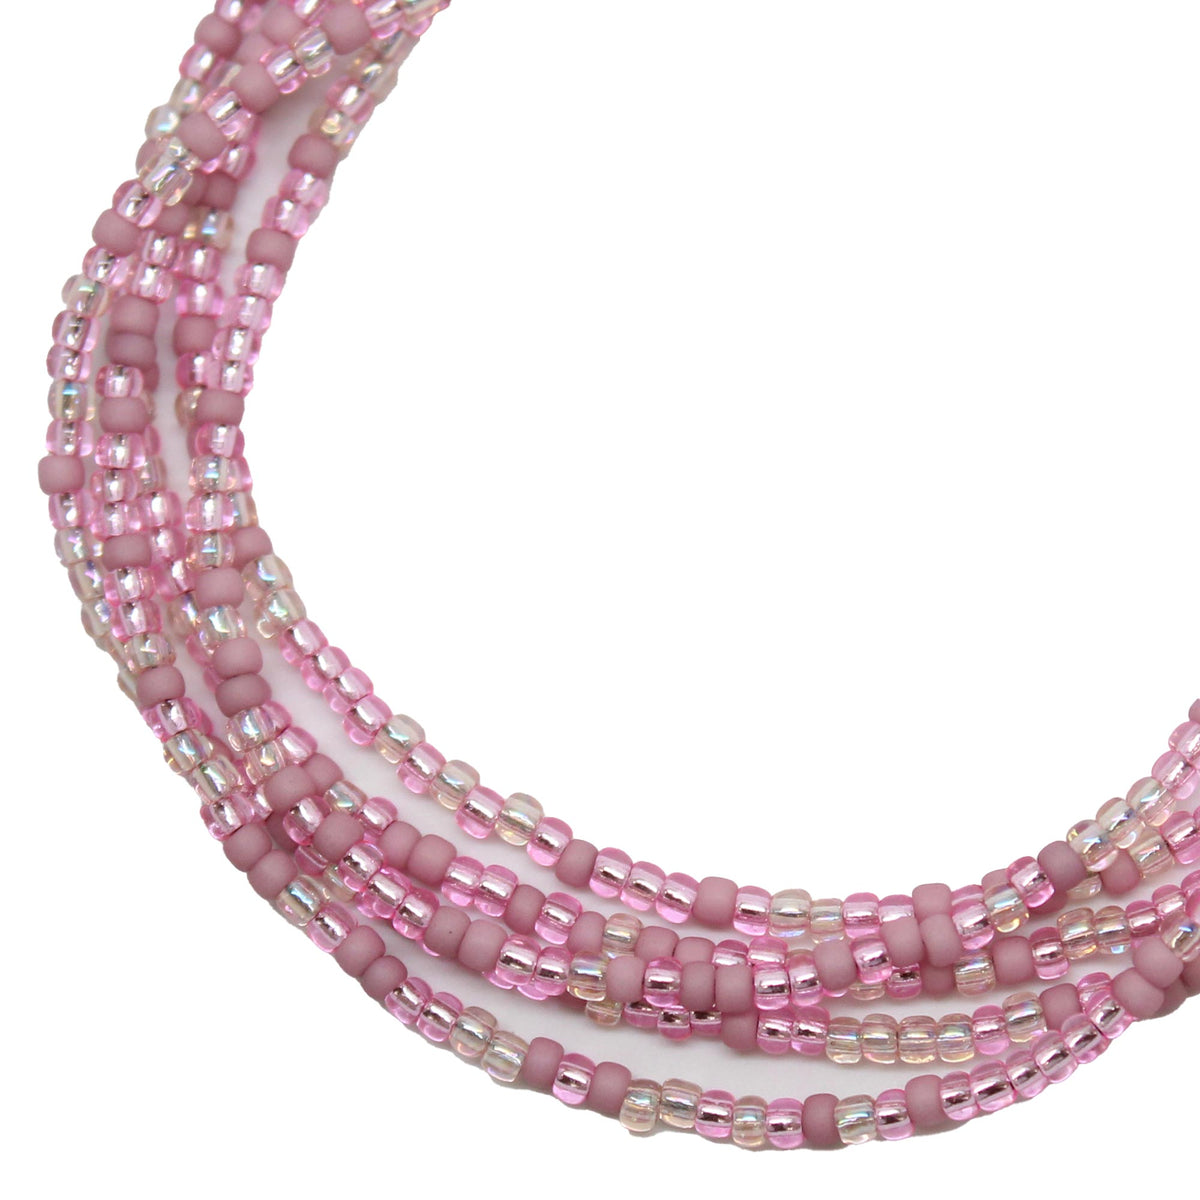 Search: Bead Necklaces Bulk Pink